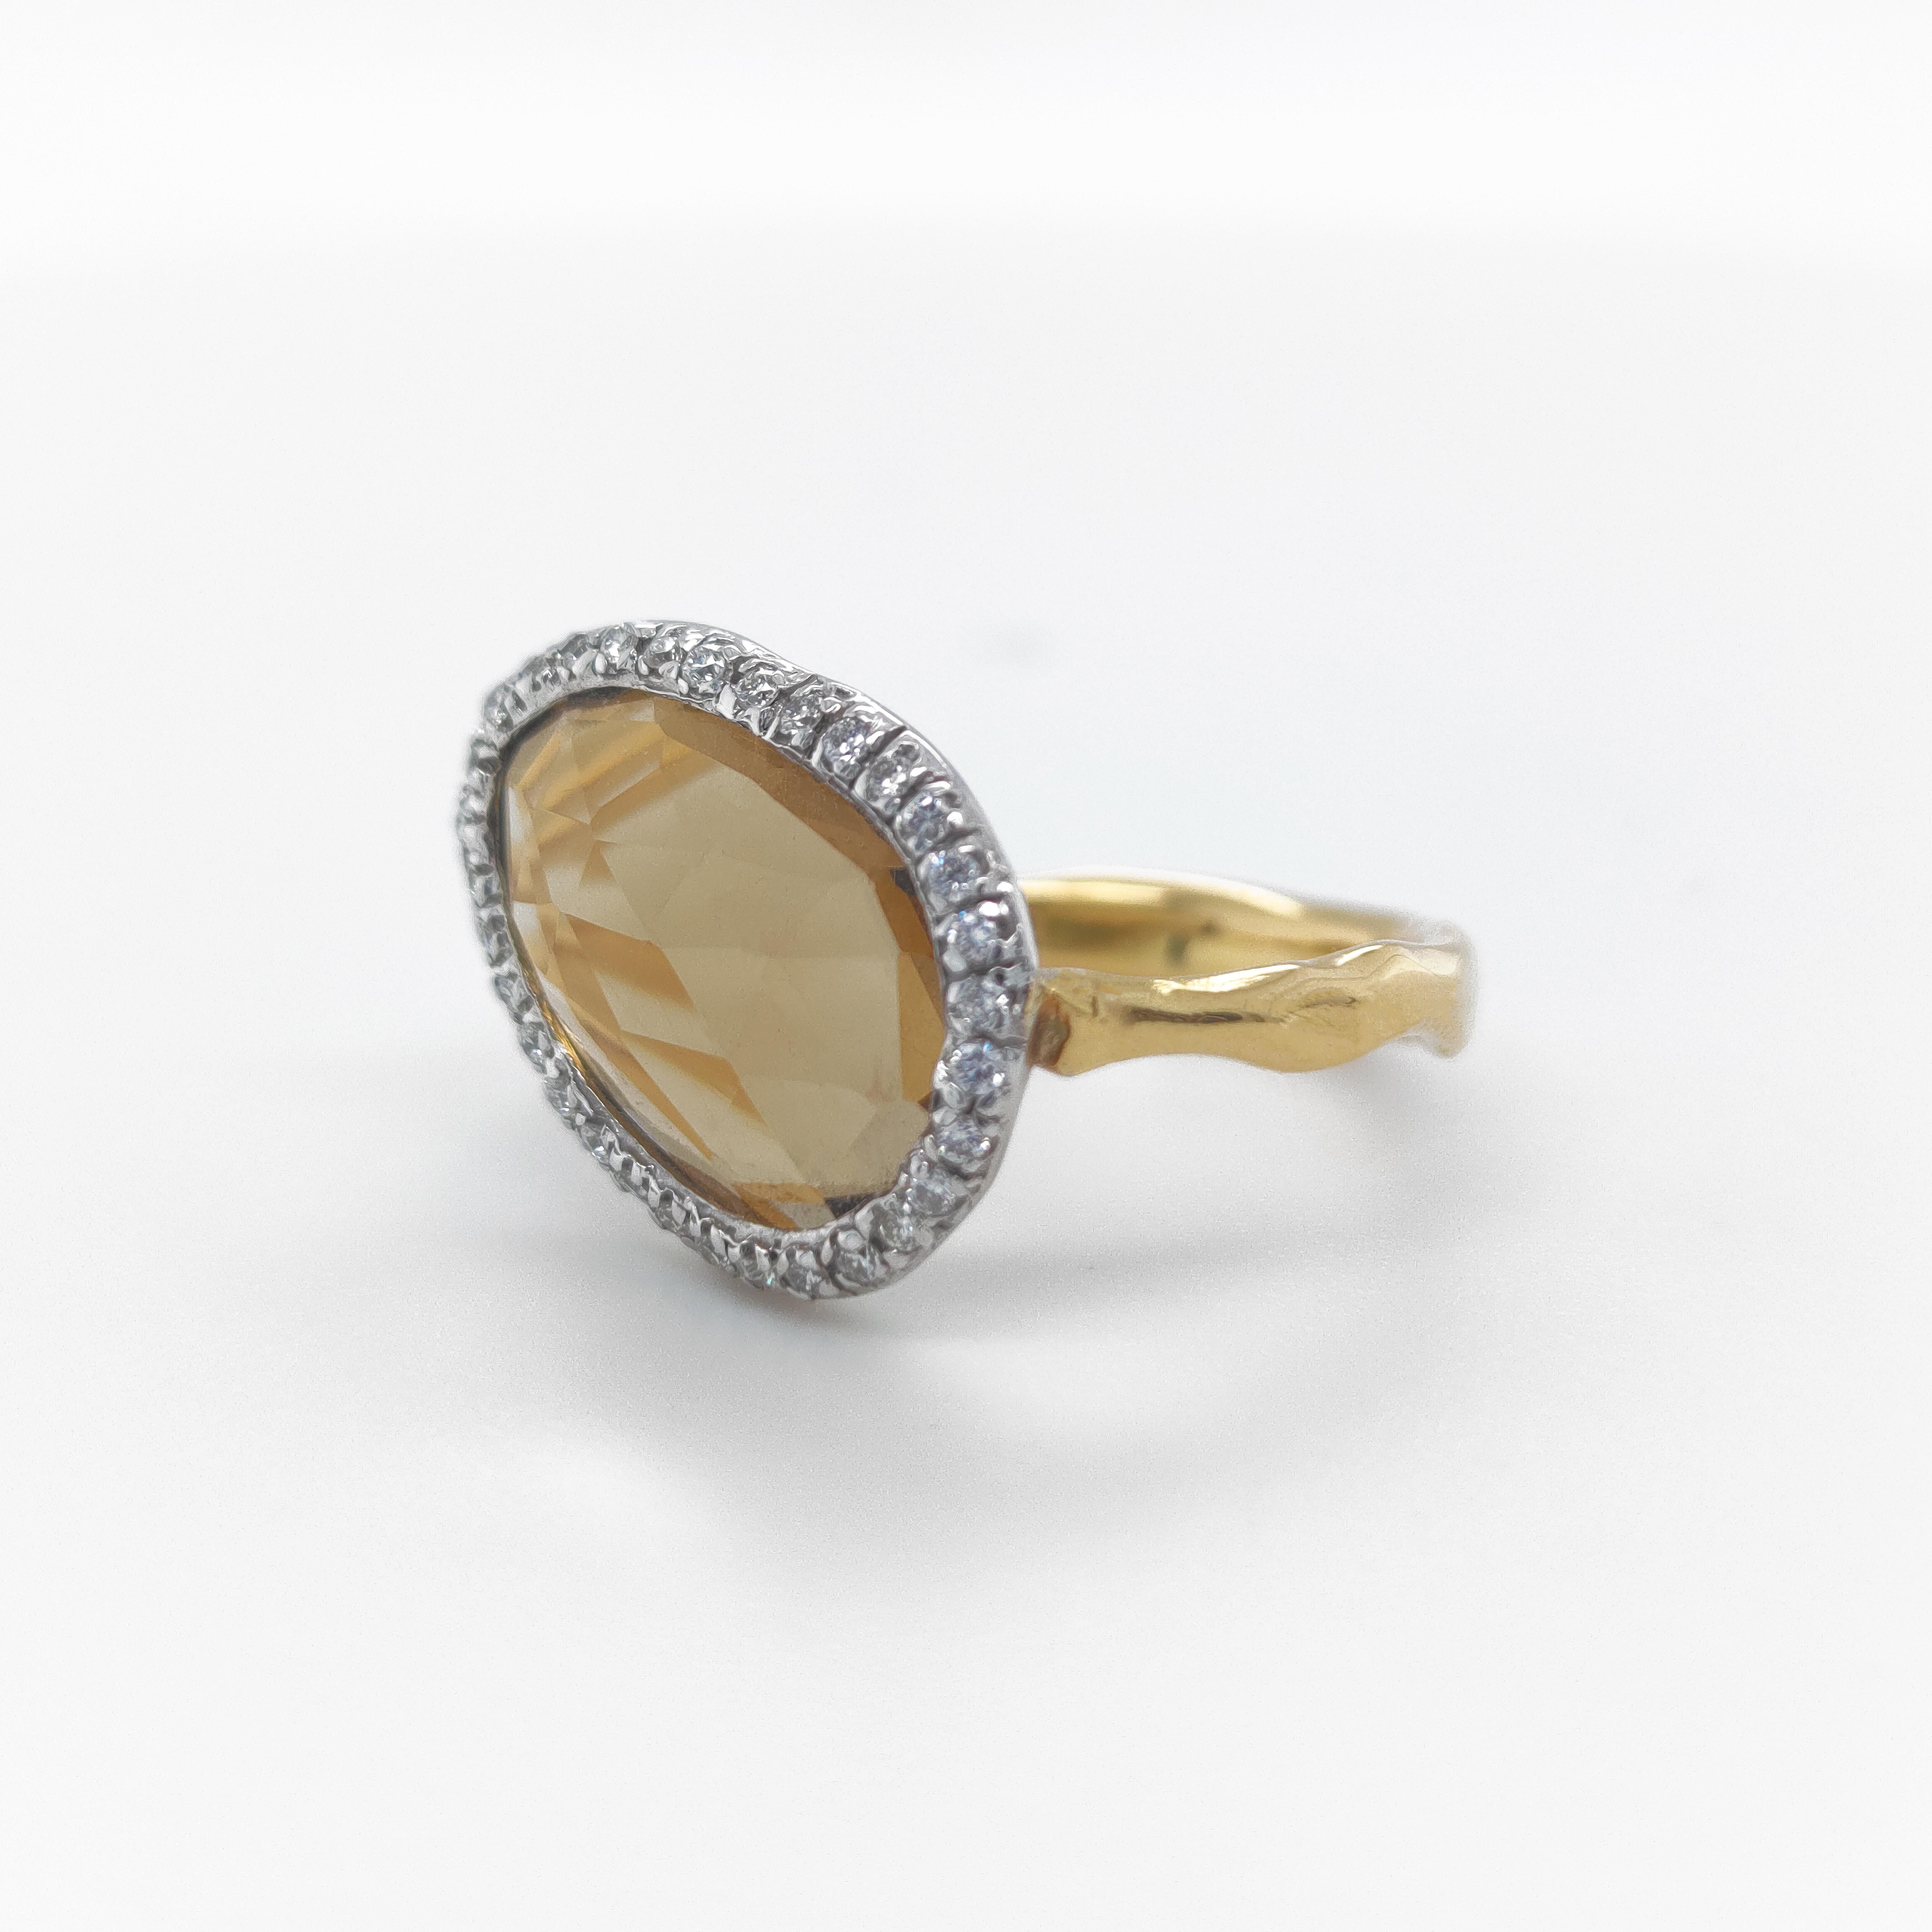 This Dharma ring is composed of 3, 30 gr of 18kt yellow gold, 0, 15 cts of natural brilliant-cut diamonds and a unique Citrine Quartz. It is a very versatile ring that may be worn everyday on its own or may be stacked with any other band ring. The